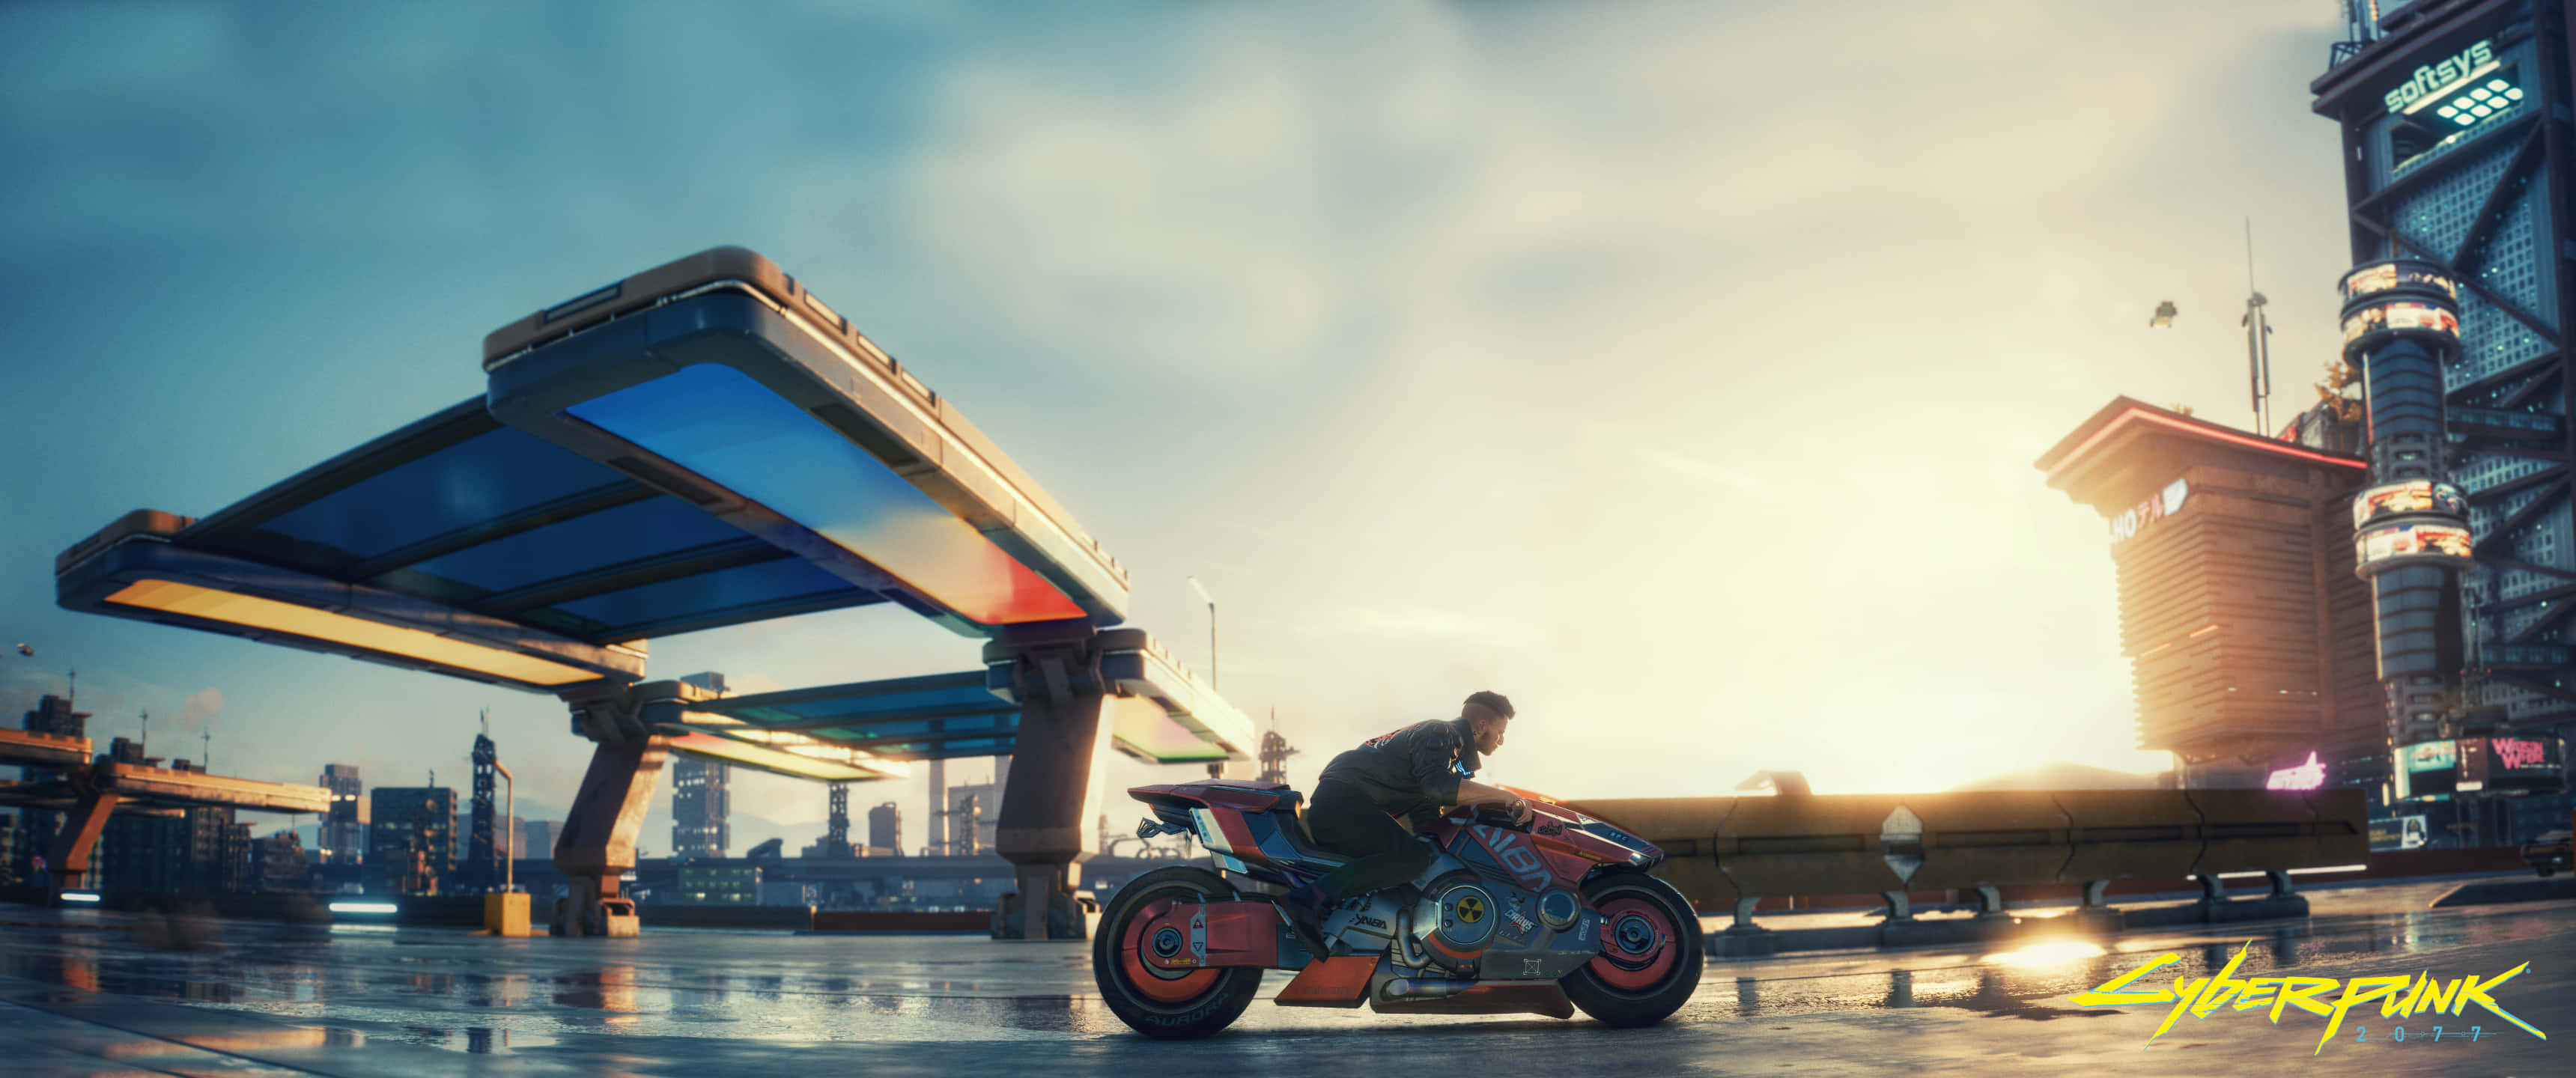 A Man Riding A Motorcycle In Front Of A City Wallpaper